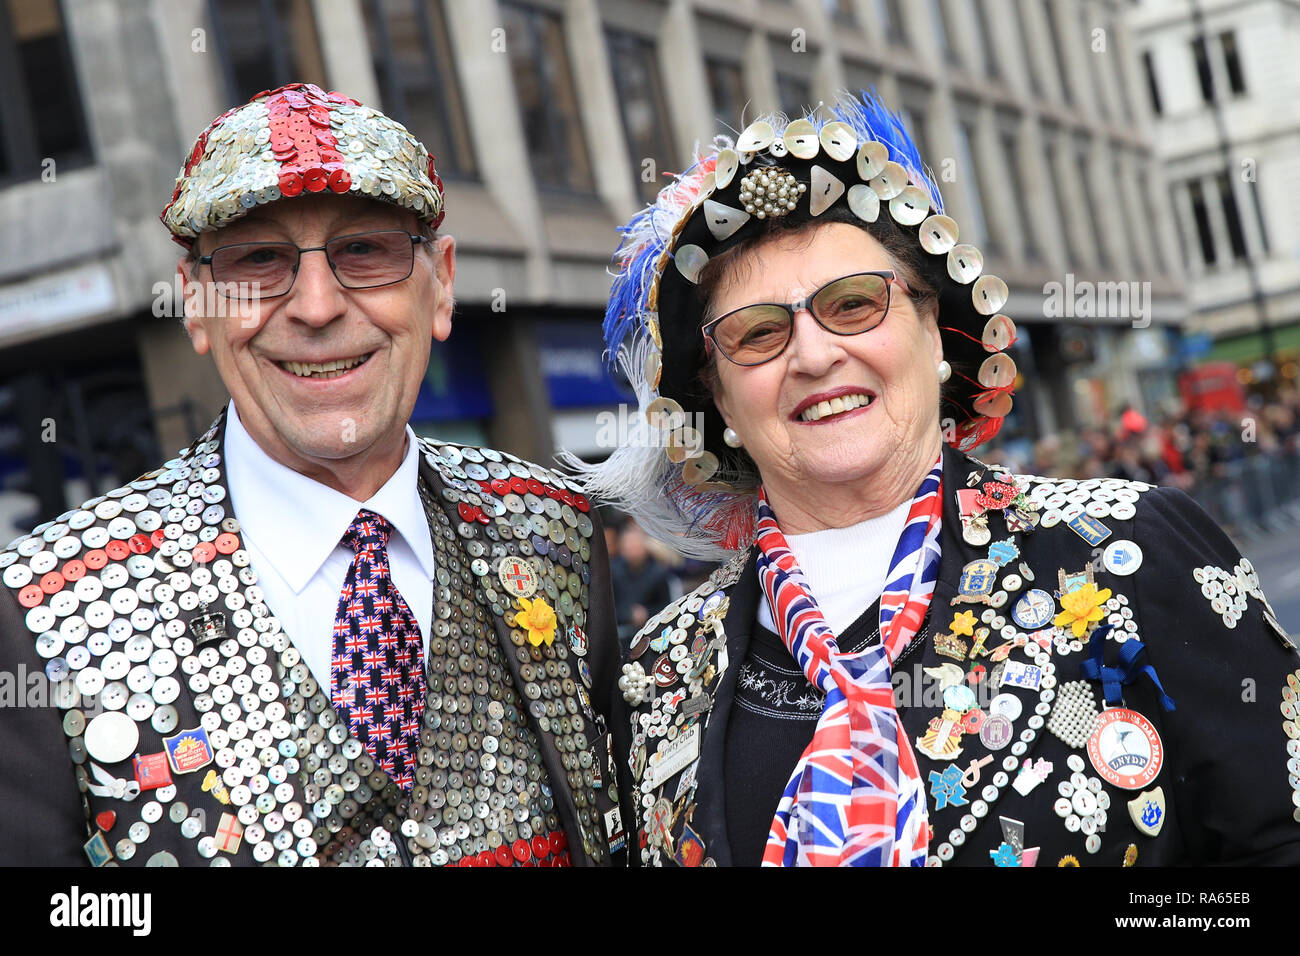 London, UK. UK. 01st Jan, 2019. London, UK. 1st Jan 2019. Two London Pearlies, a Pearly King and Queen from Forest Gate and Old Kent Road. London's New Year's Day Parade 2019, or LNYDP, features just over 10,000 participants from the USA, UJ and Europe perform in marching bands, cheer leading squads, themed floats from London's Boroughs, and many other groups. The route progresses from Piccadilly via popular landmarks such as Trafalgar Square towards Whitehall in central London every year. Credit: Imageplotter News and Sports/Alamy Live News Stock Photo